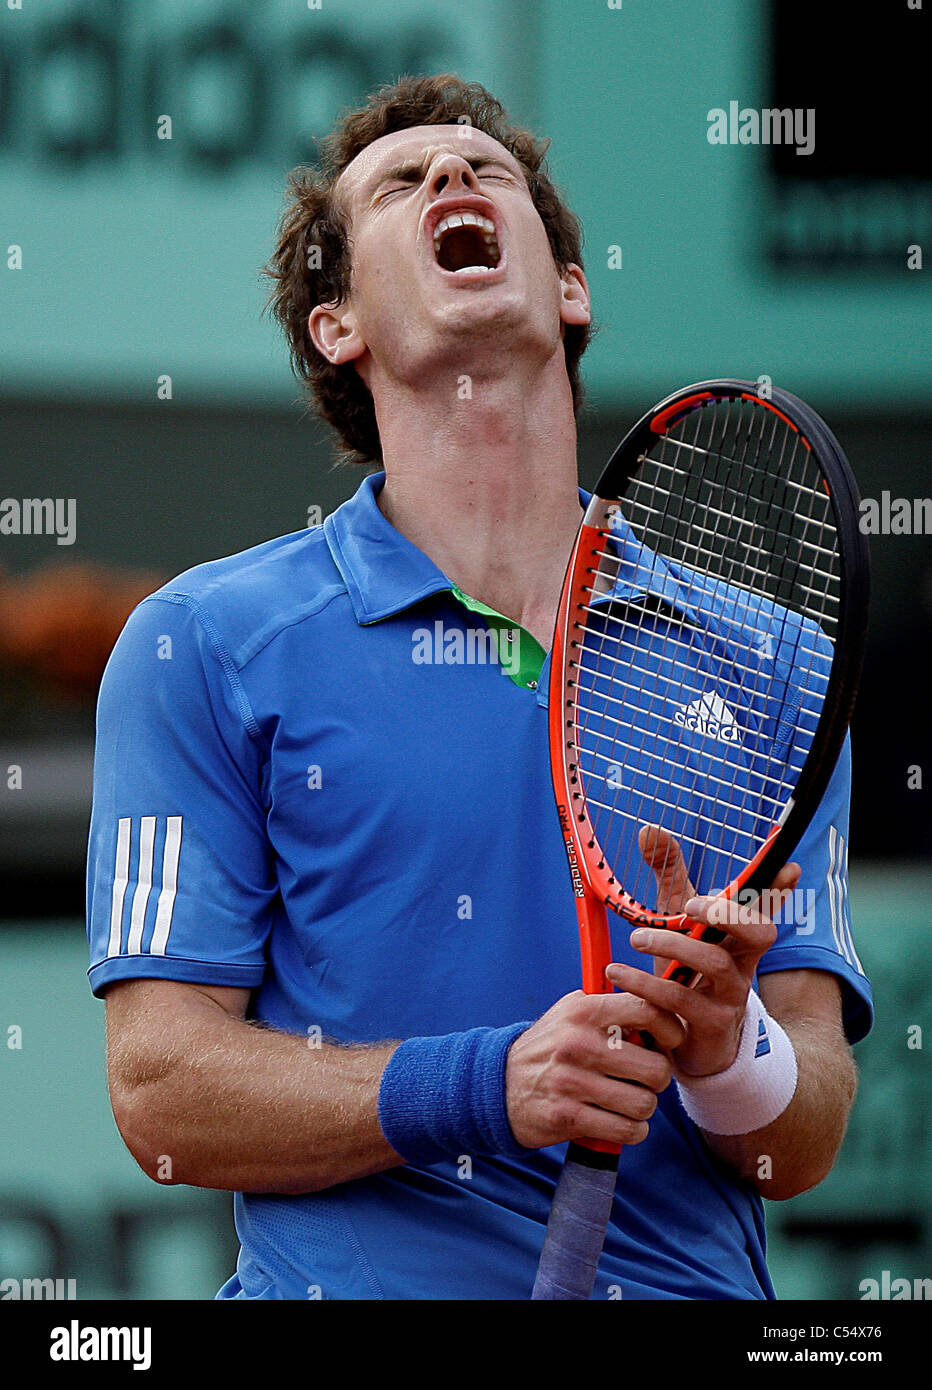 Andy Murray upset after a tennis game Stock Photo